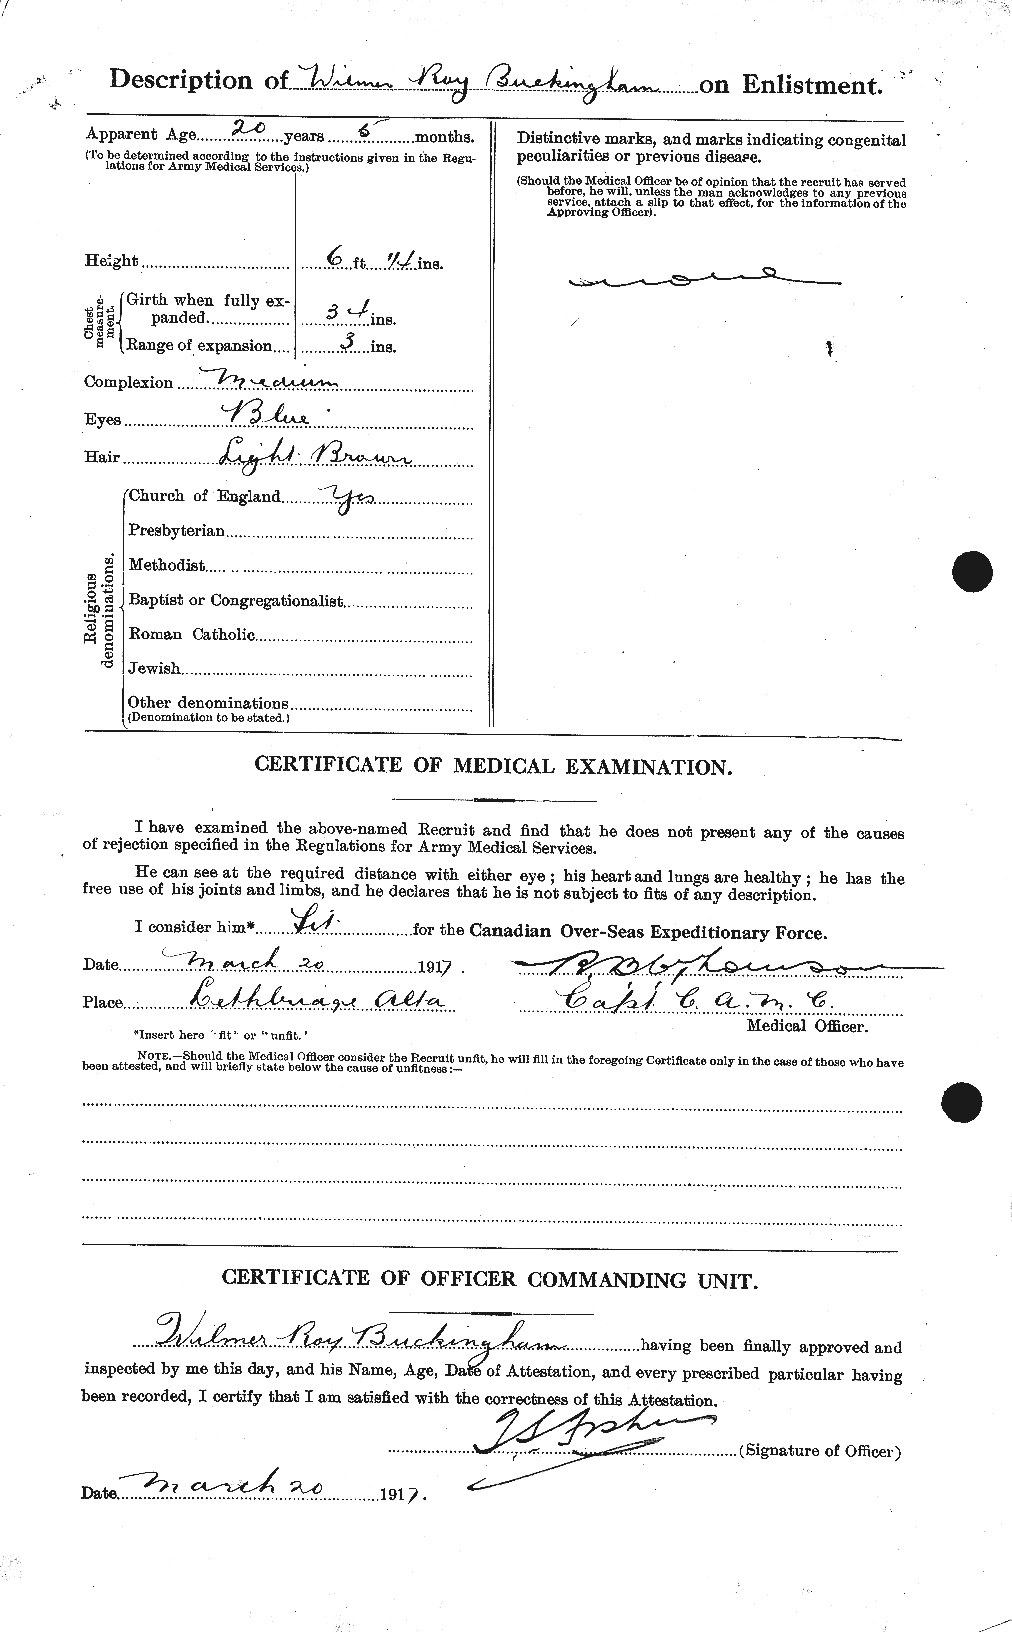 Personnel Records of the First World War - CEF 269476b